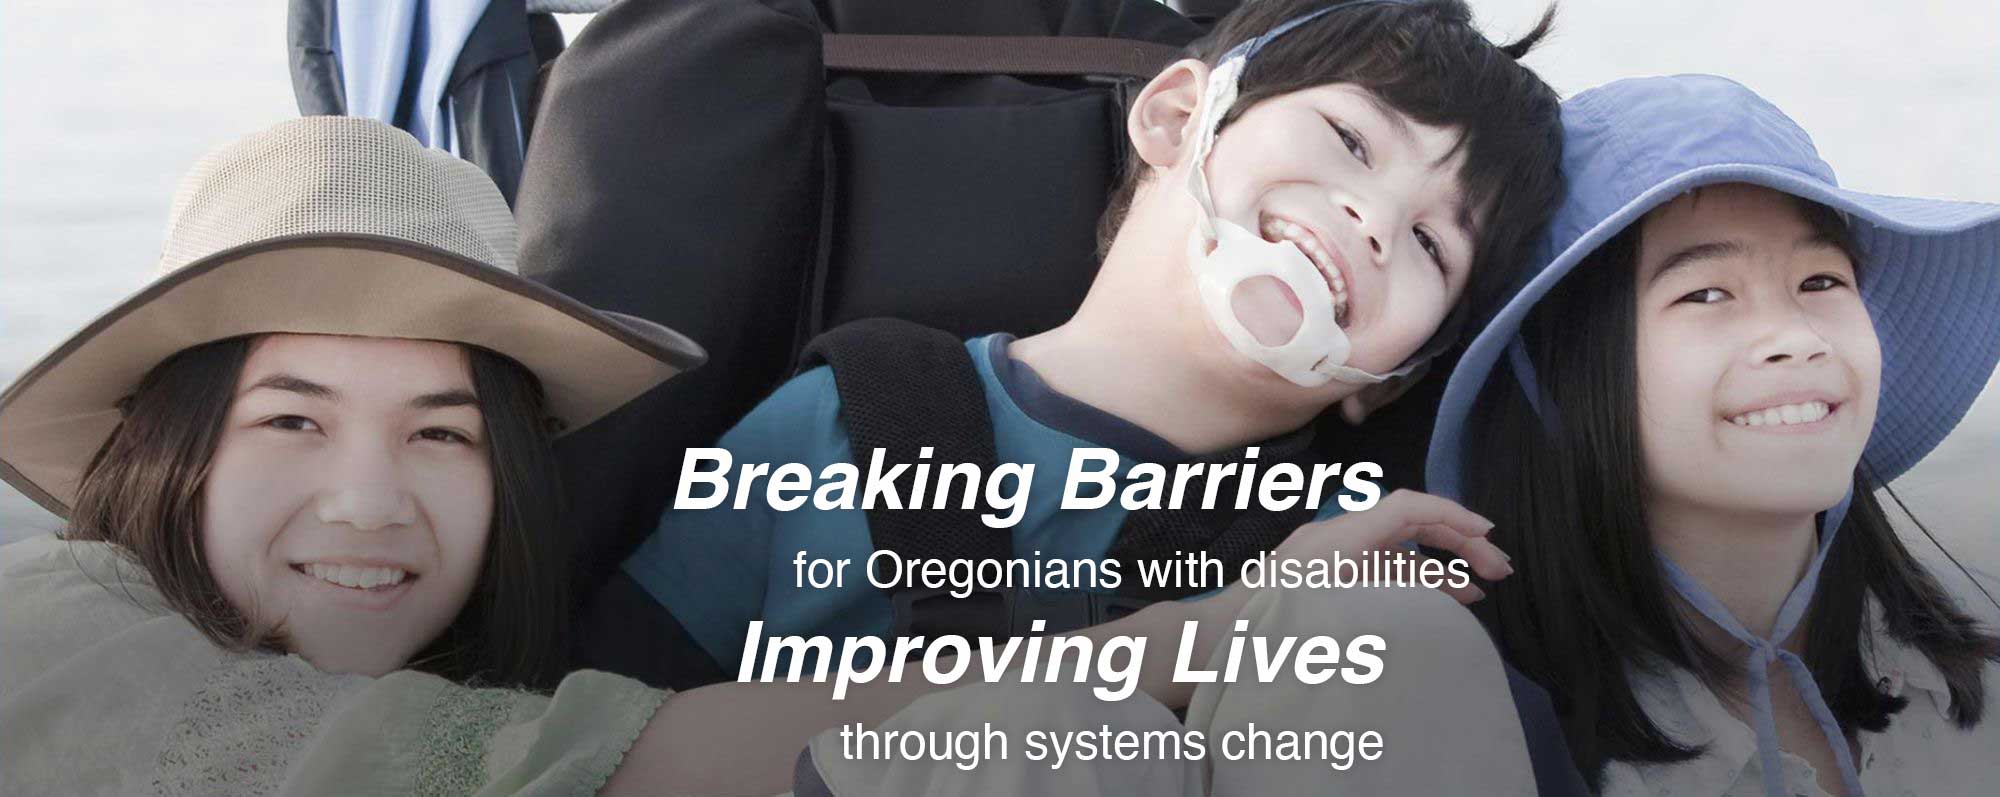 Breaking Barriers for Oregonians with disabilities, Improving Lives through systems change